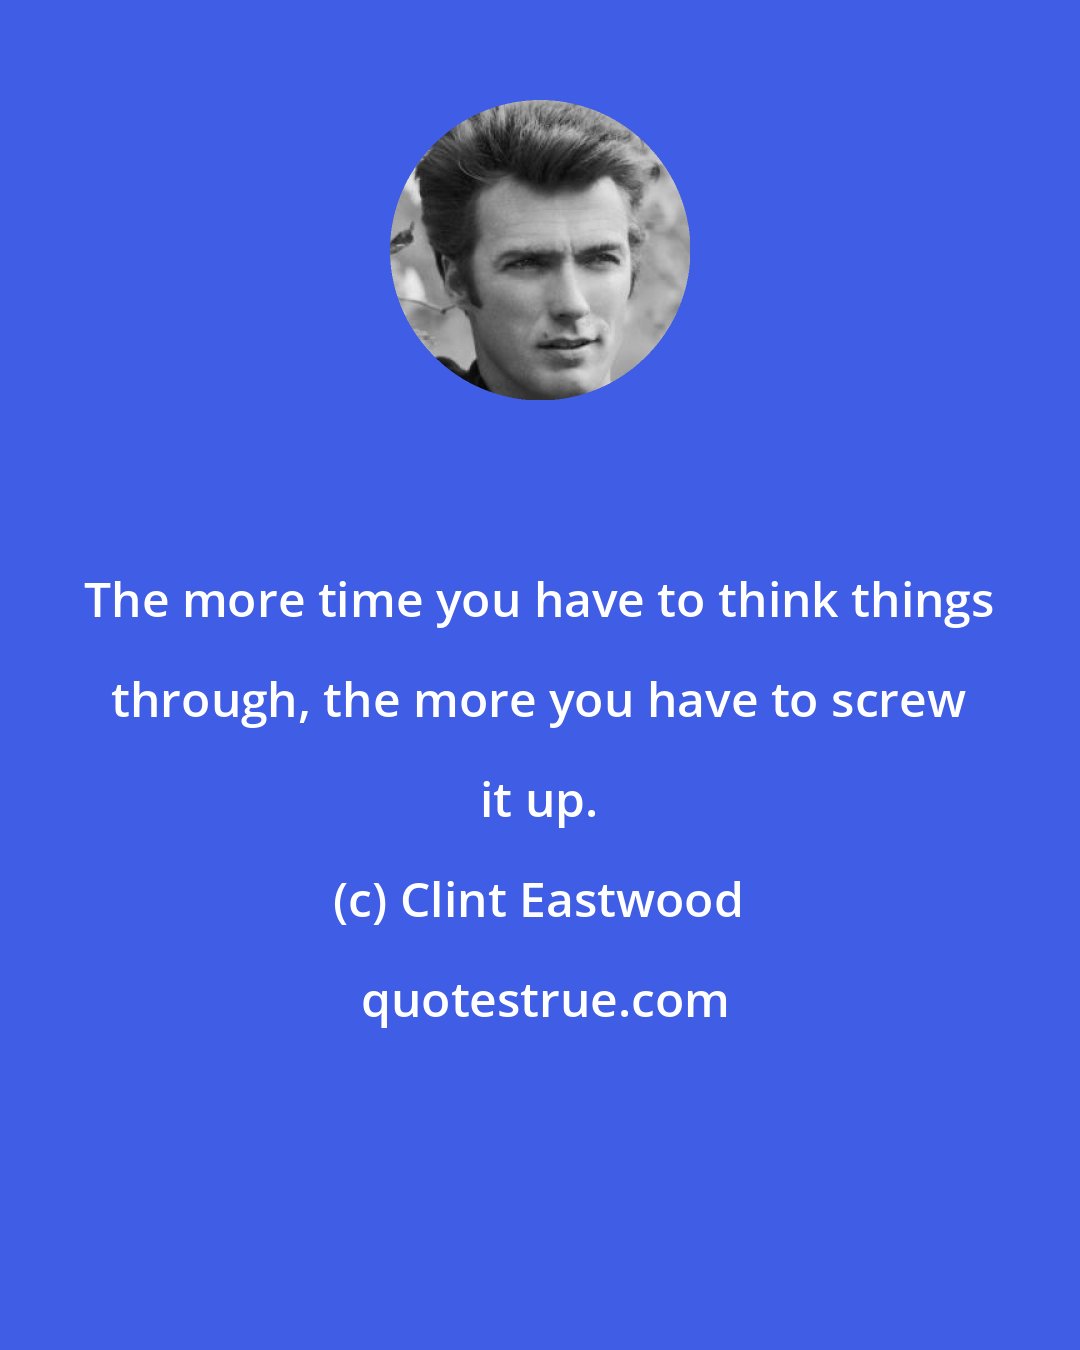 Clint Eastwood: The more time you have to think things through, the more you have to screw it up.